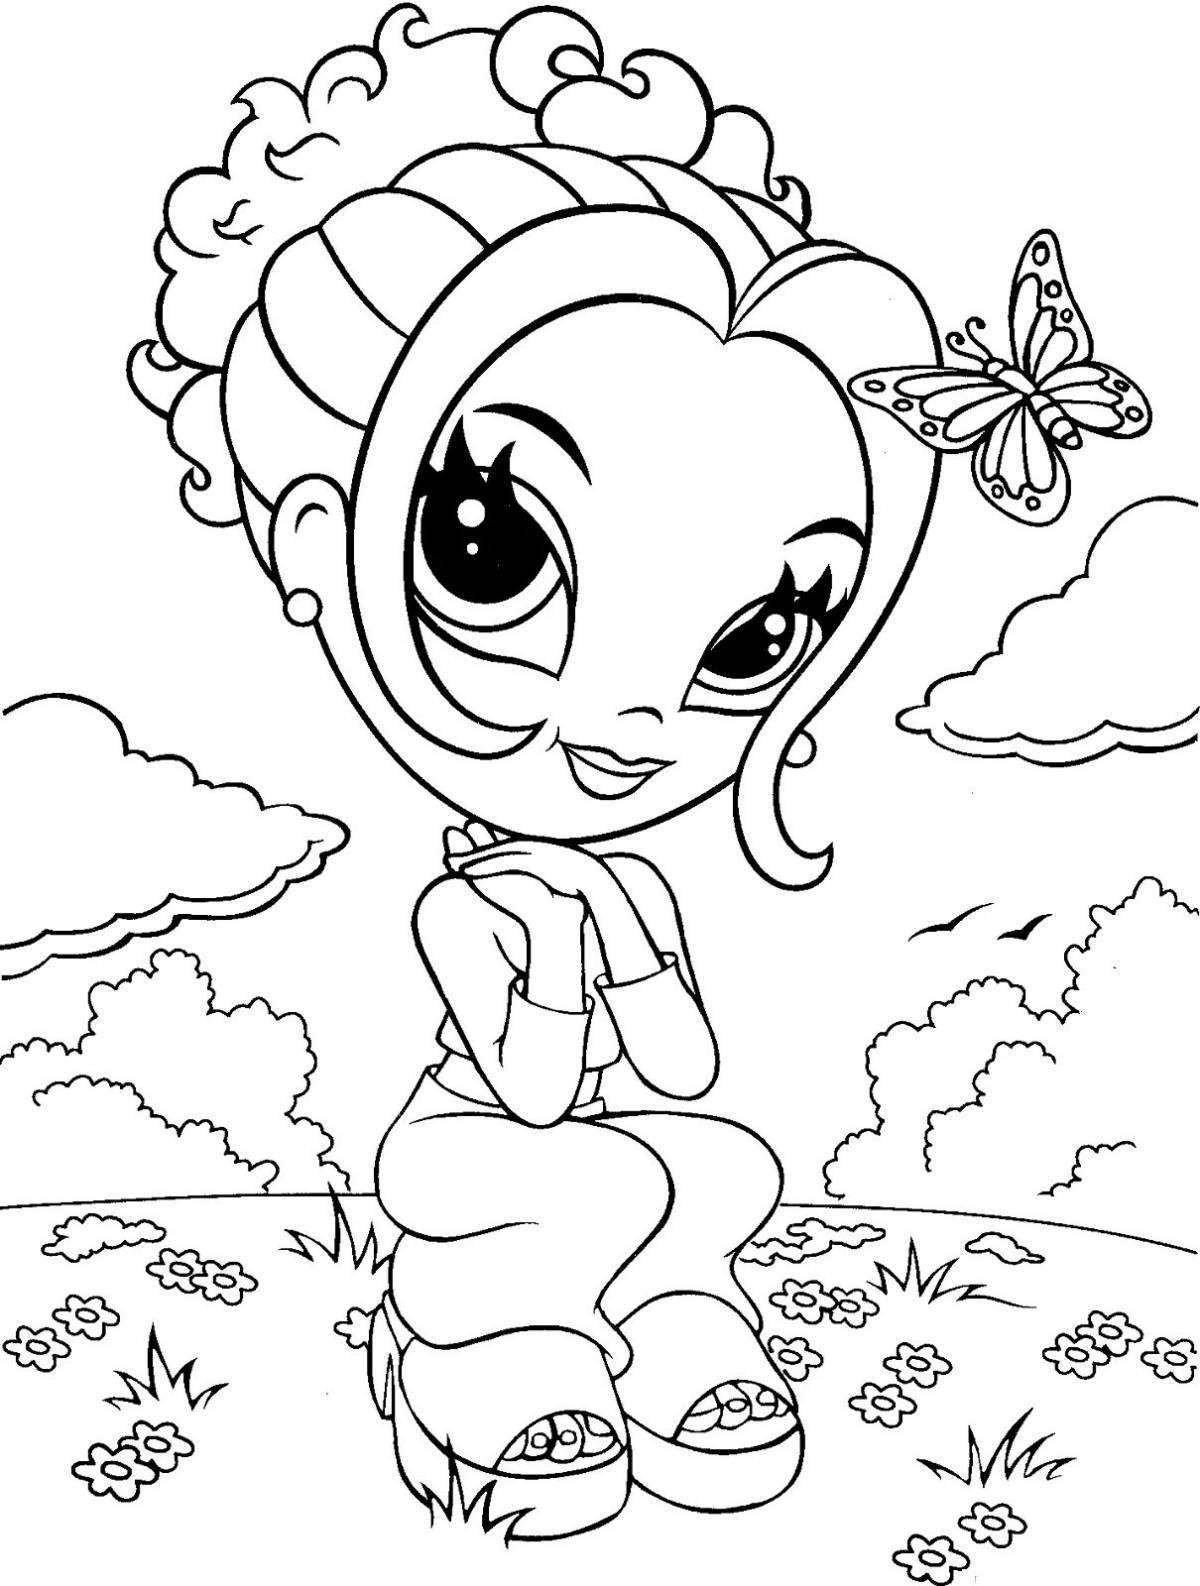 Bright coloring coloring photo